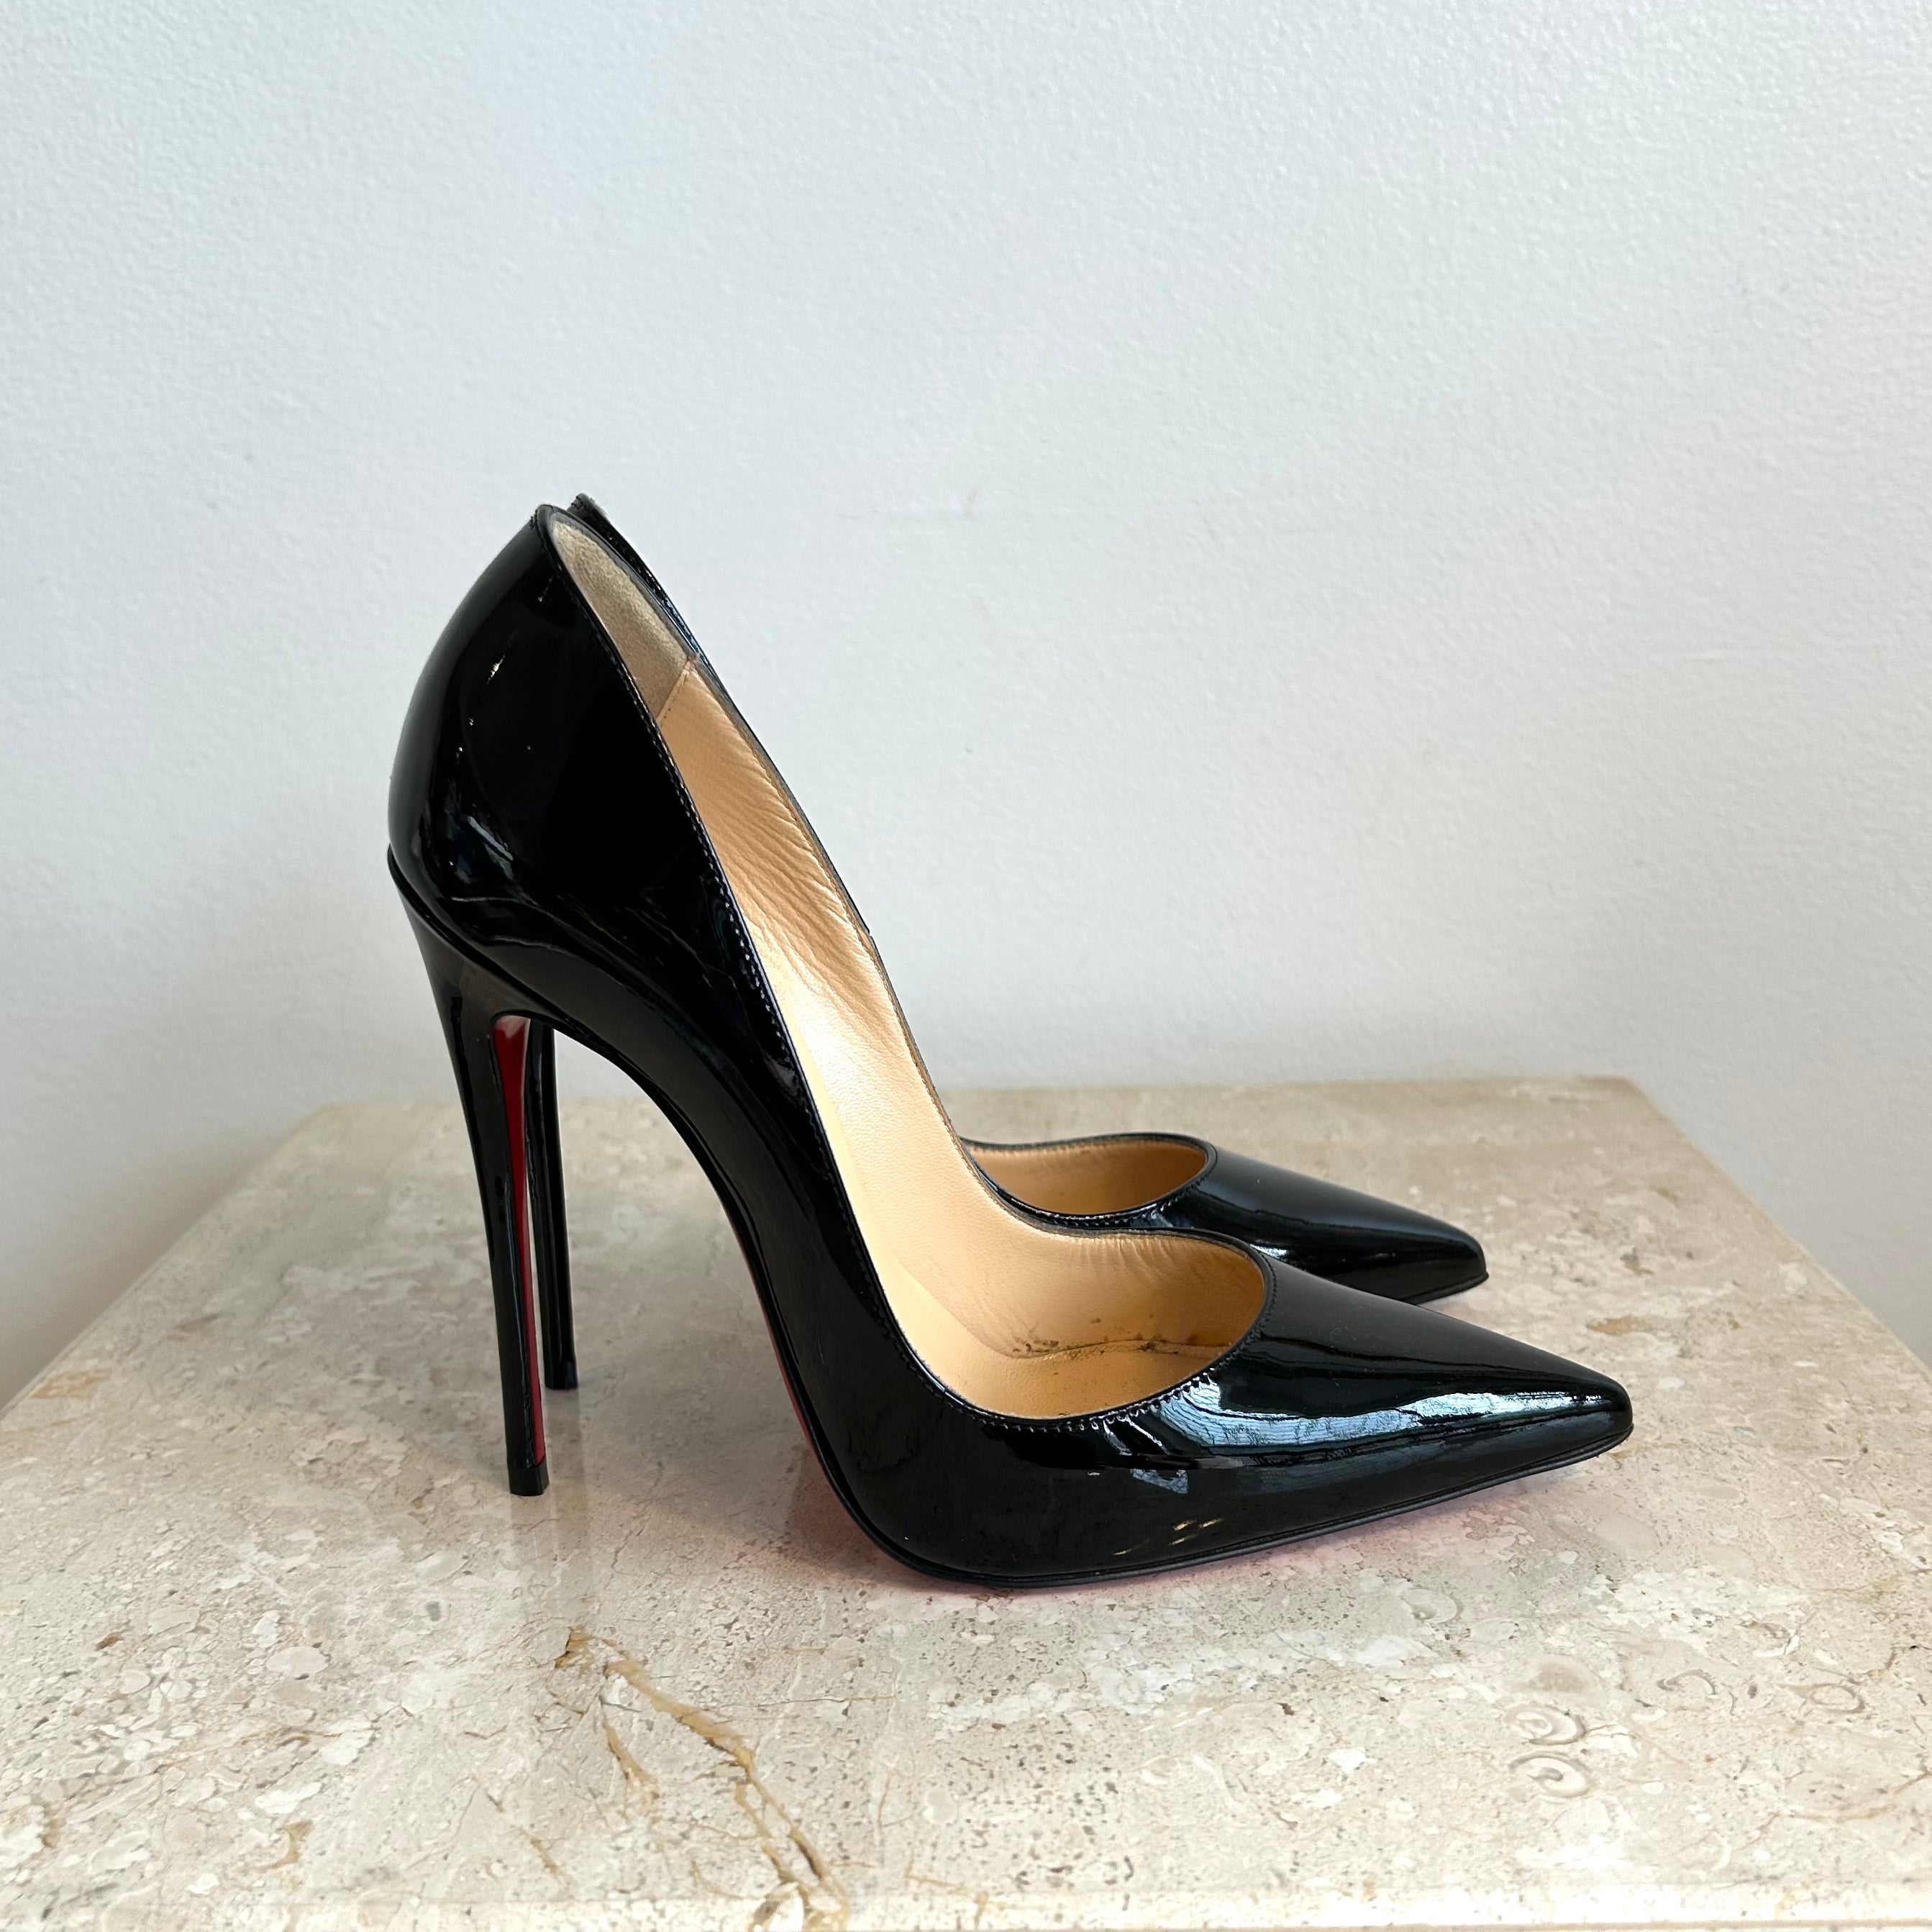 Pre-Owned CHRISTIAN LOUBOUTIN So Kate 120 Black Patent Pump - Size 36.5